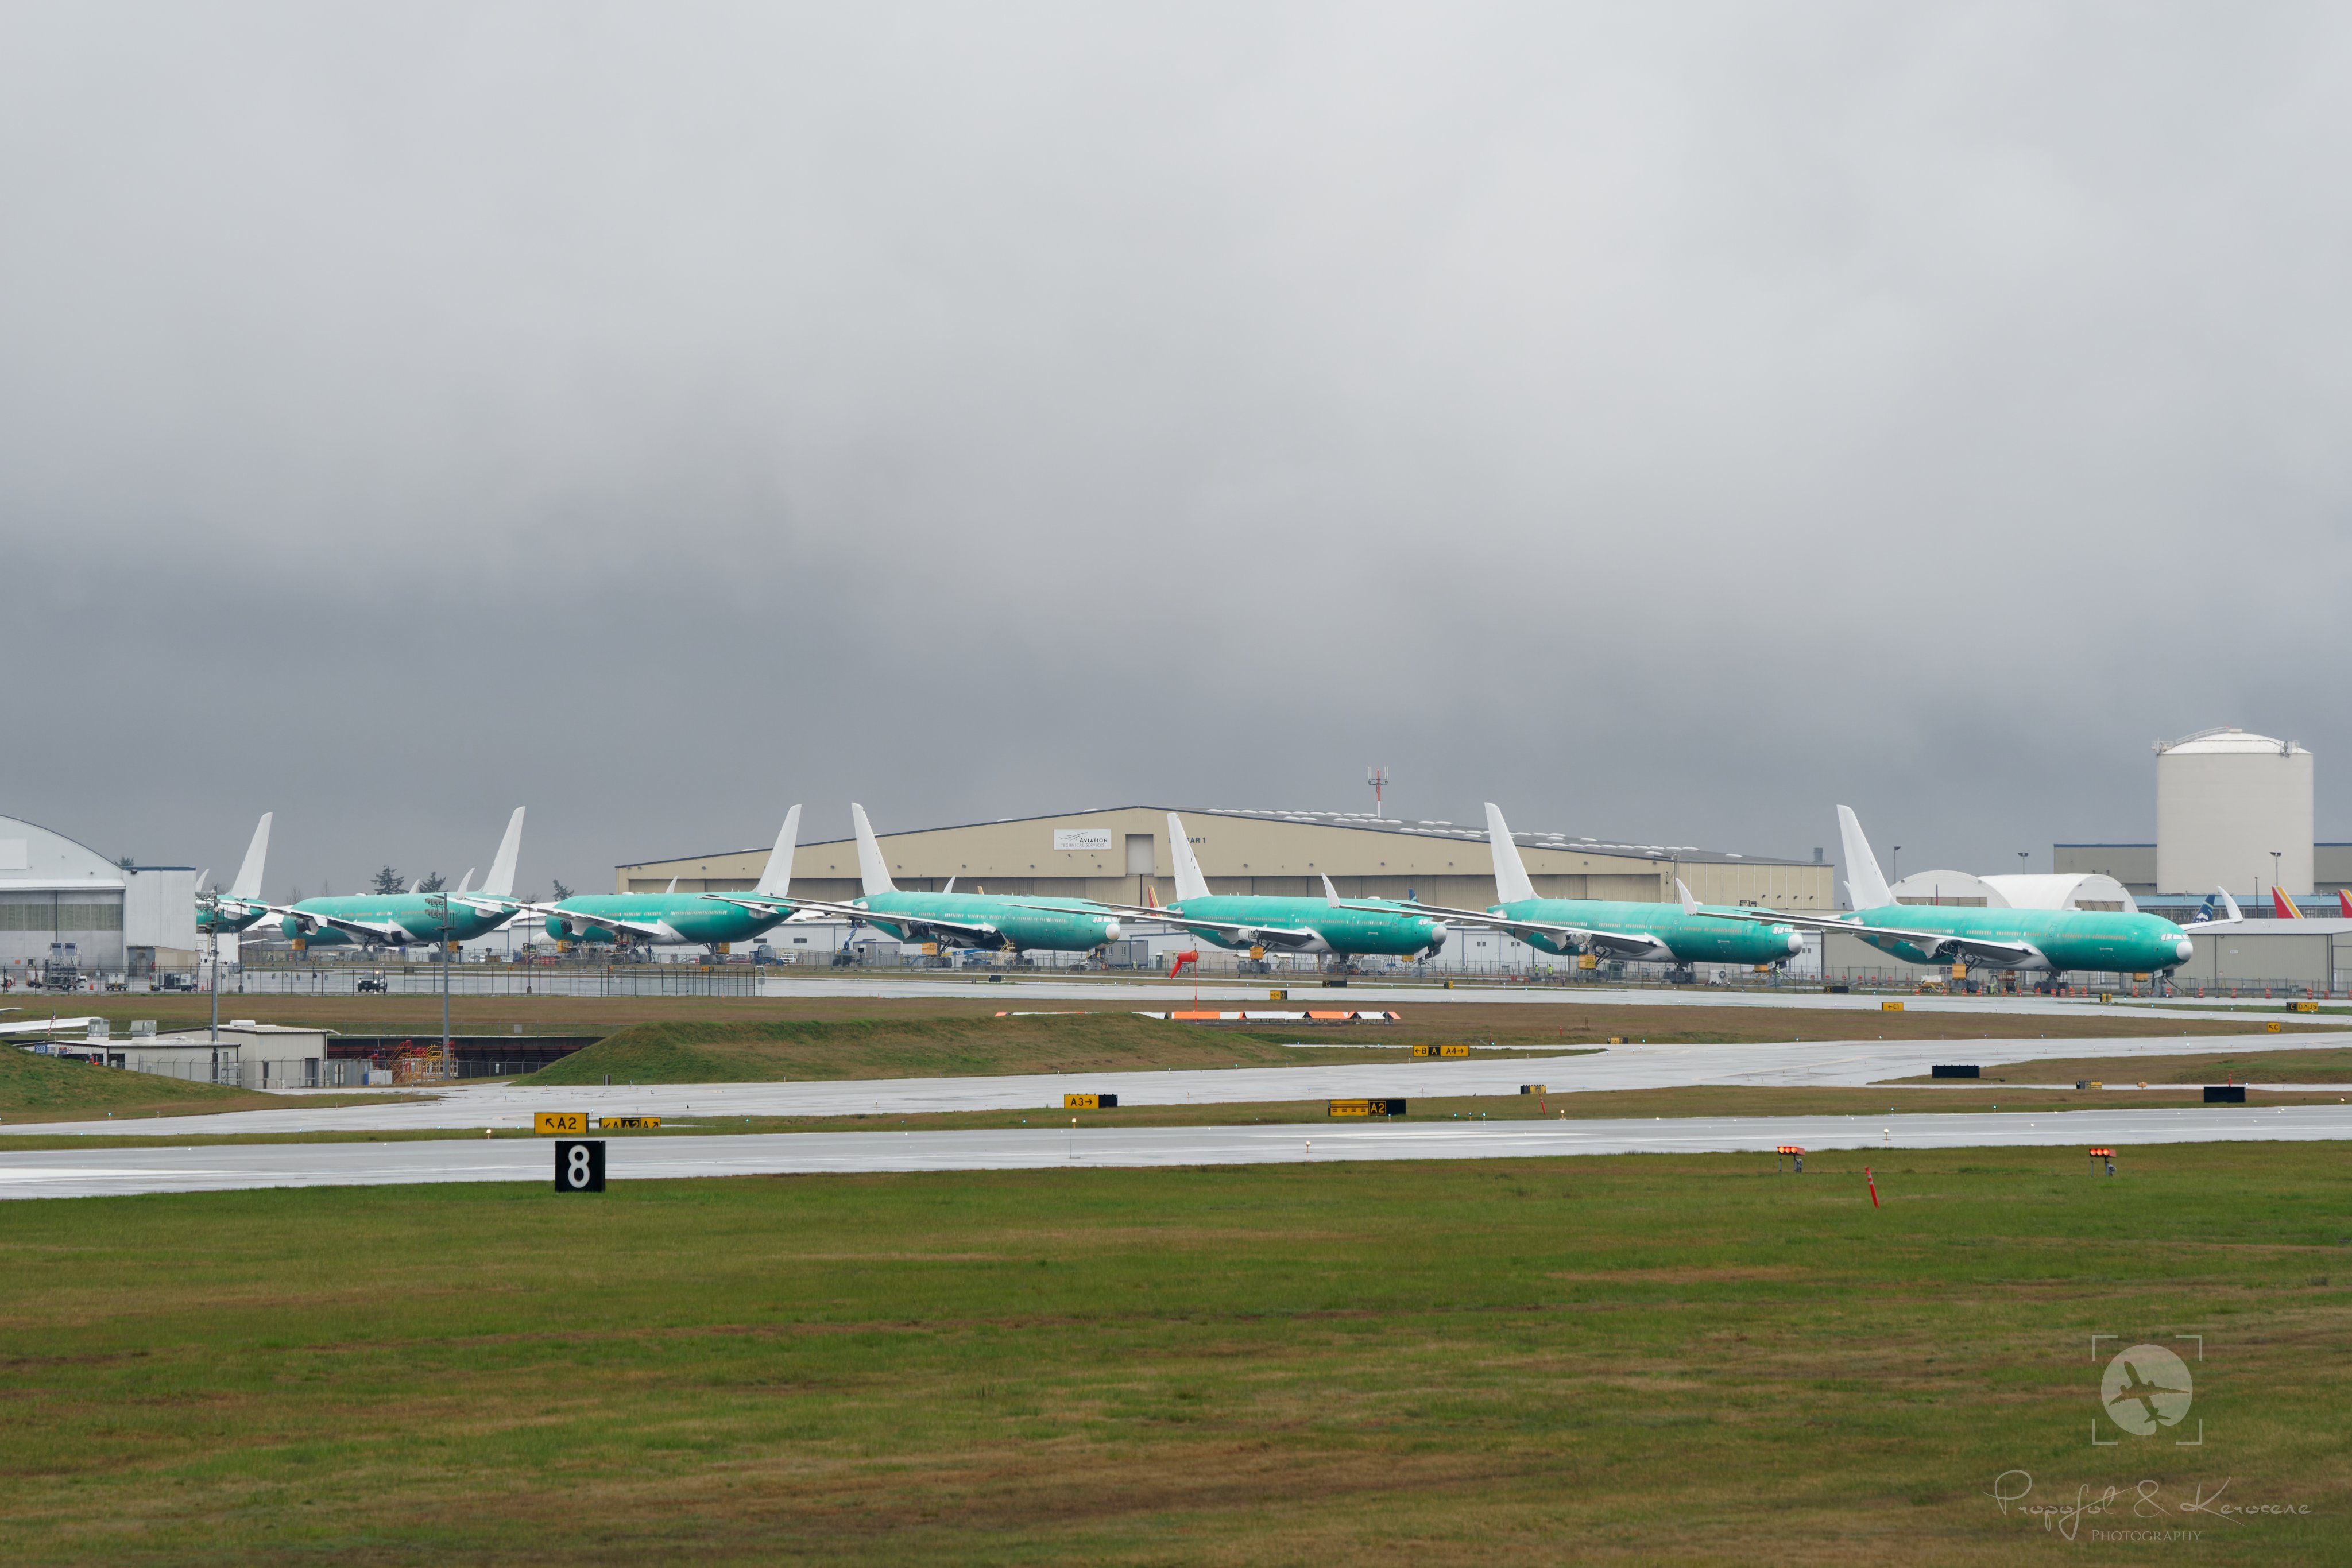 Boeing 777X program delay piled up many Shark finned white tails parked one after another at KPAE - Paine Field.